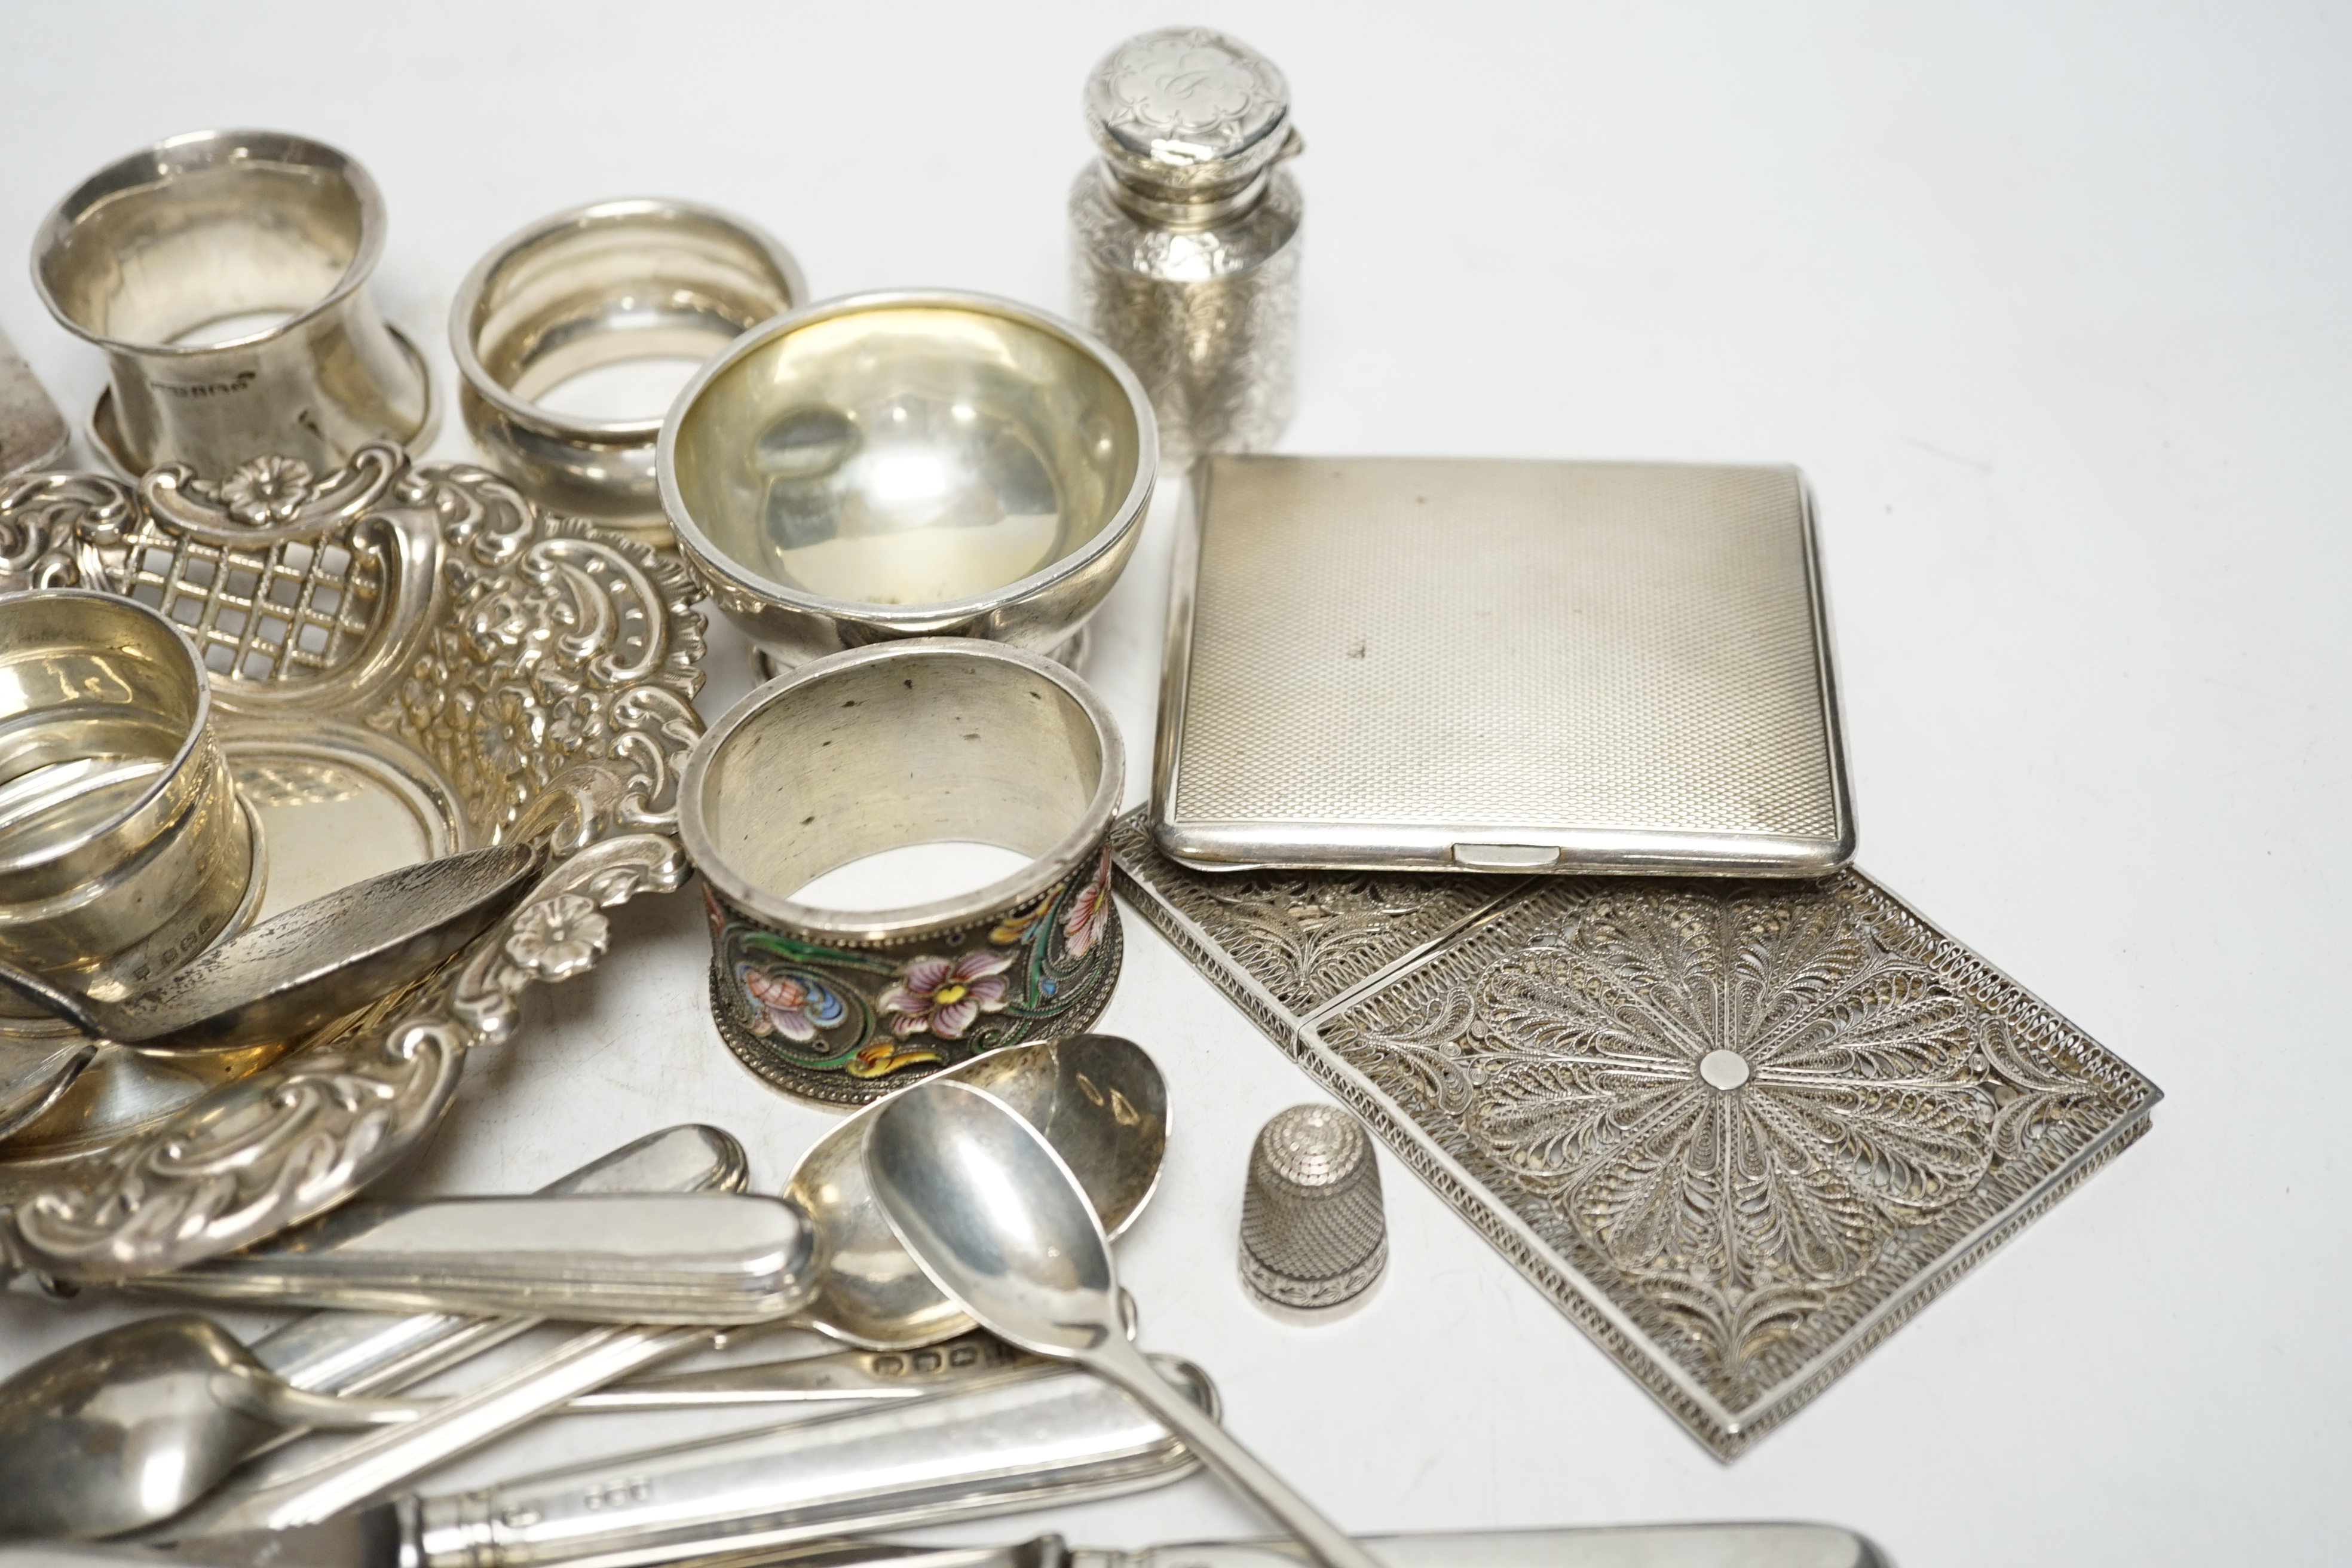 A quantity of assorted silver ad white metal items including a Russian 84 zolotnik and cloisonné enamel napkin ring, bon bon dish, scent bottle, cutlery, toast rack, cigarette case etc. Condition - fair to poor